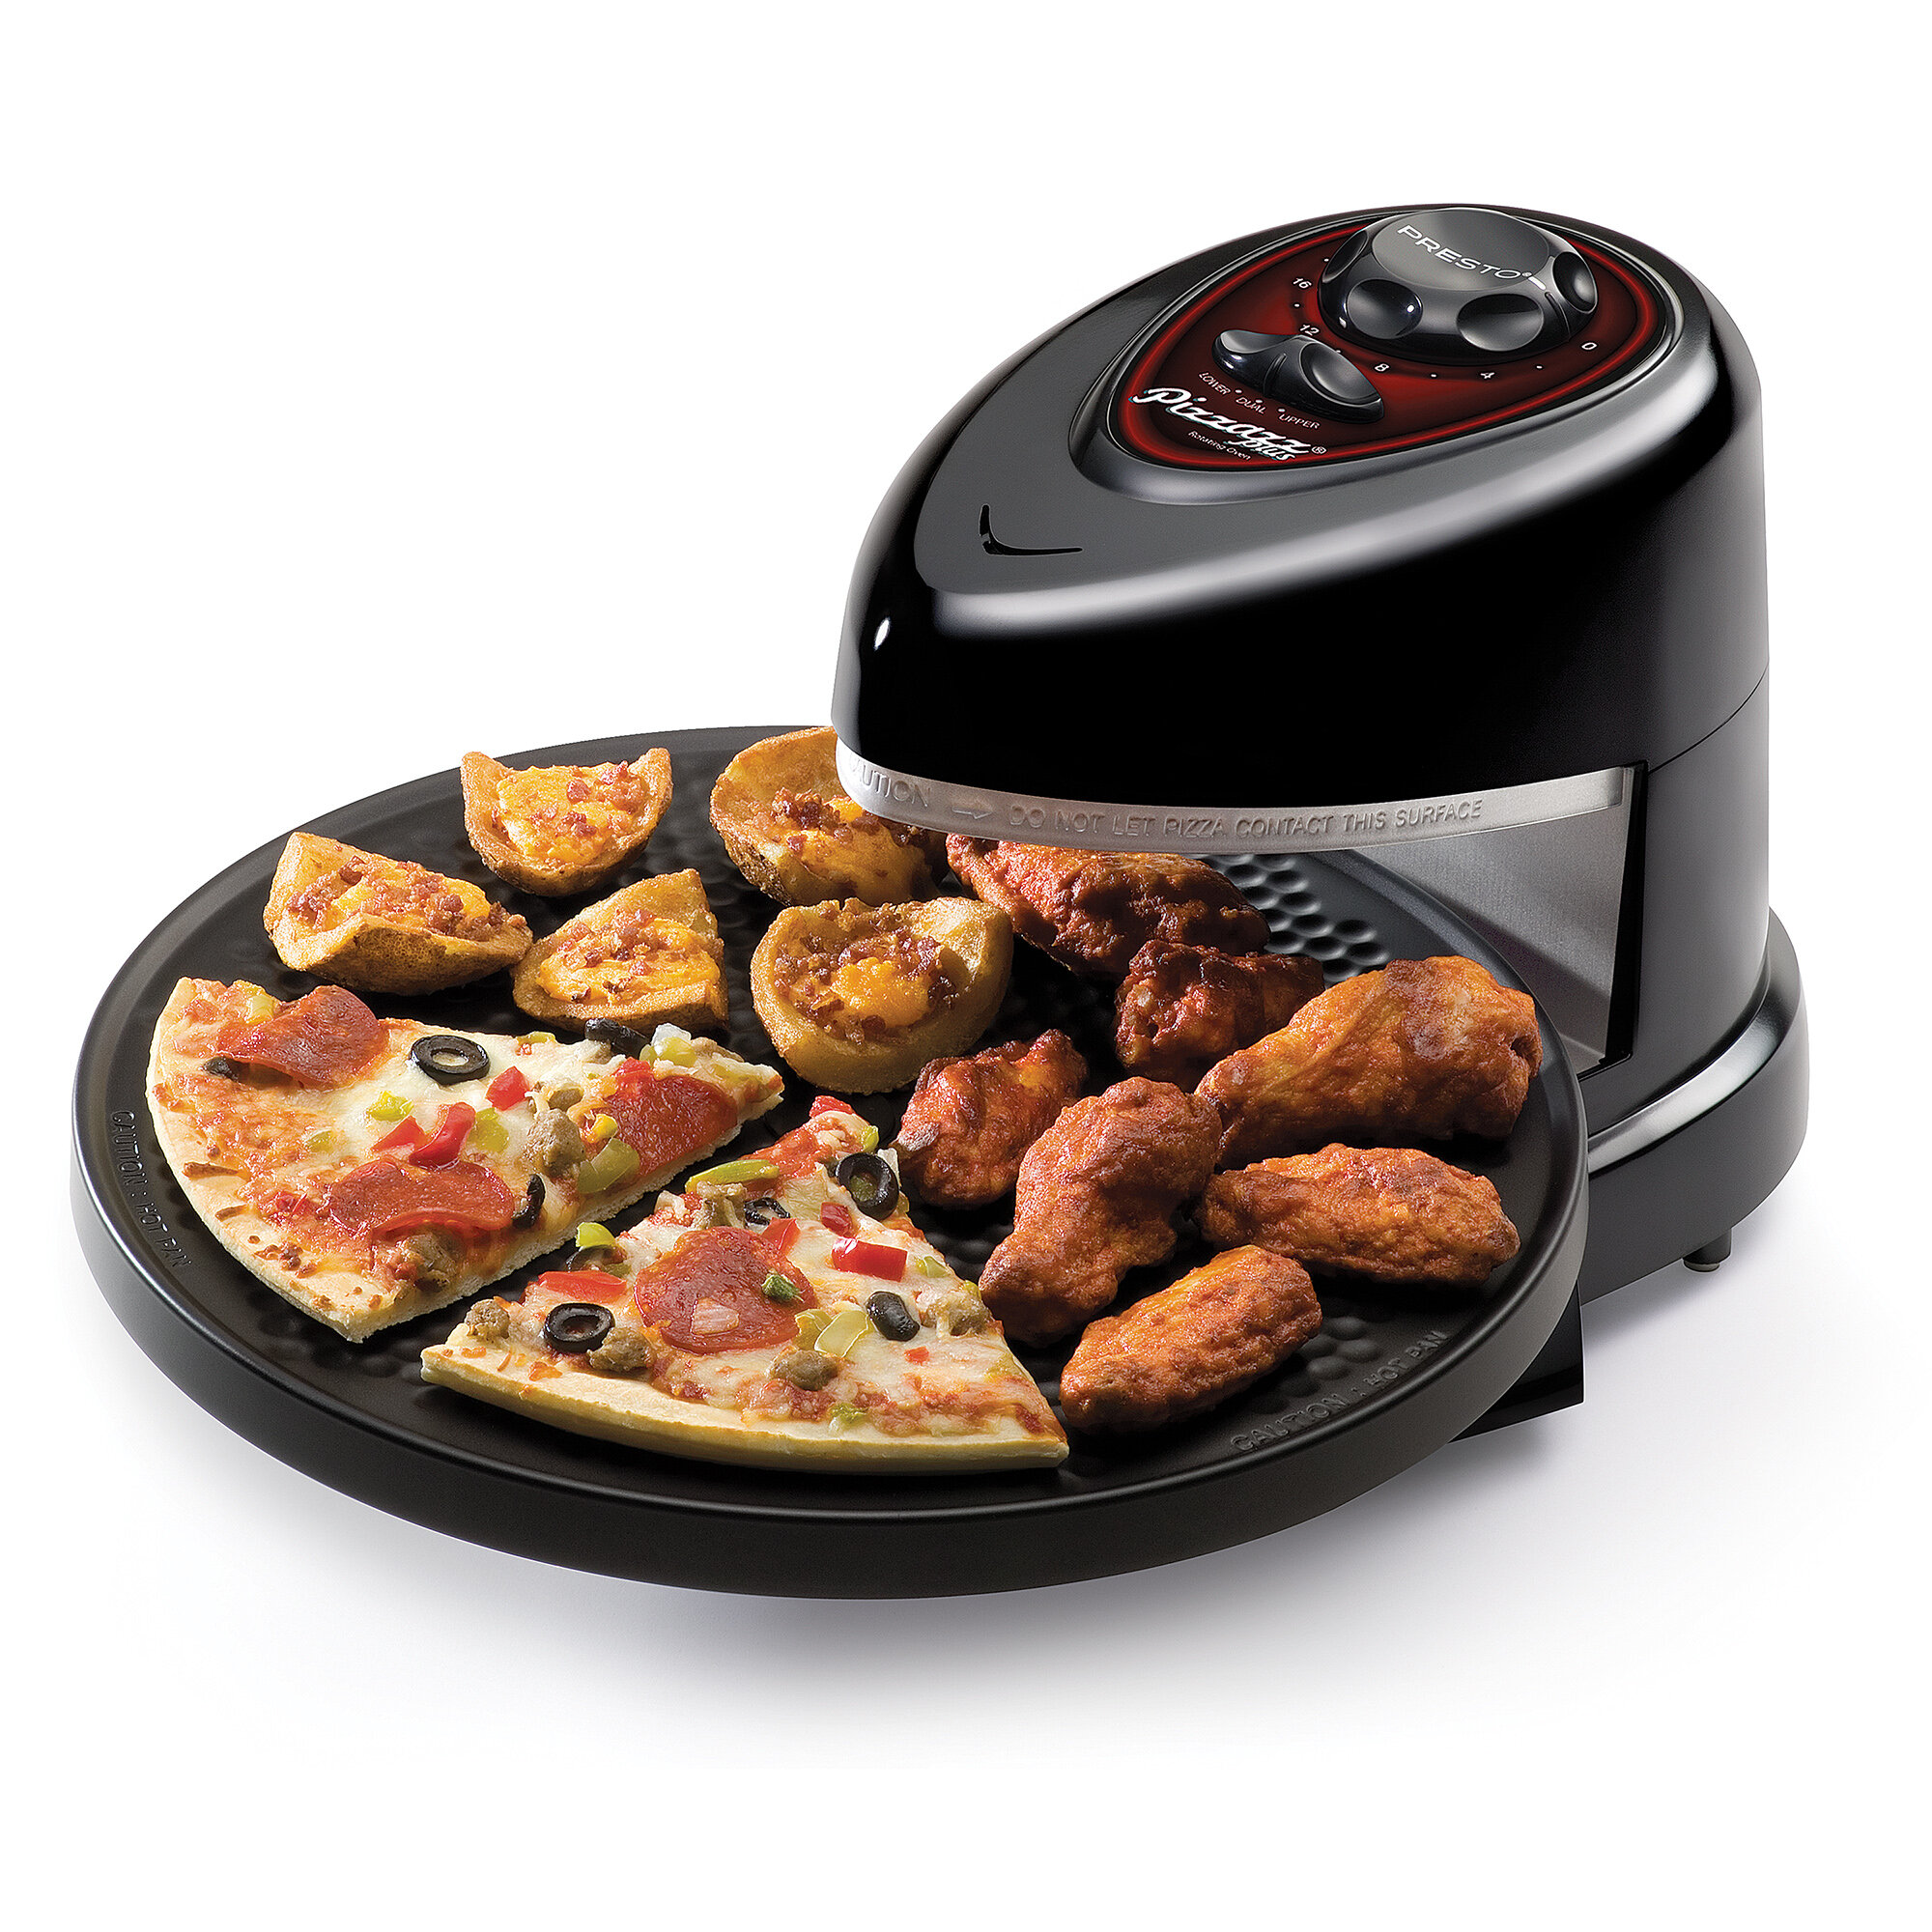 Instant Omni Plus Air Fryer Toaster Oven Combo review